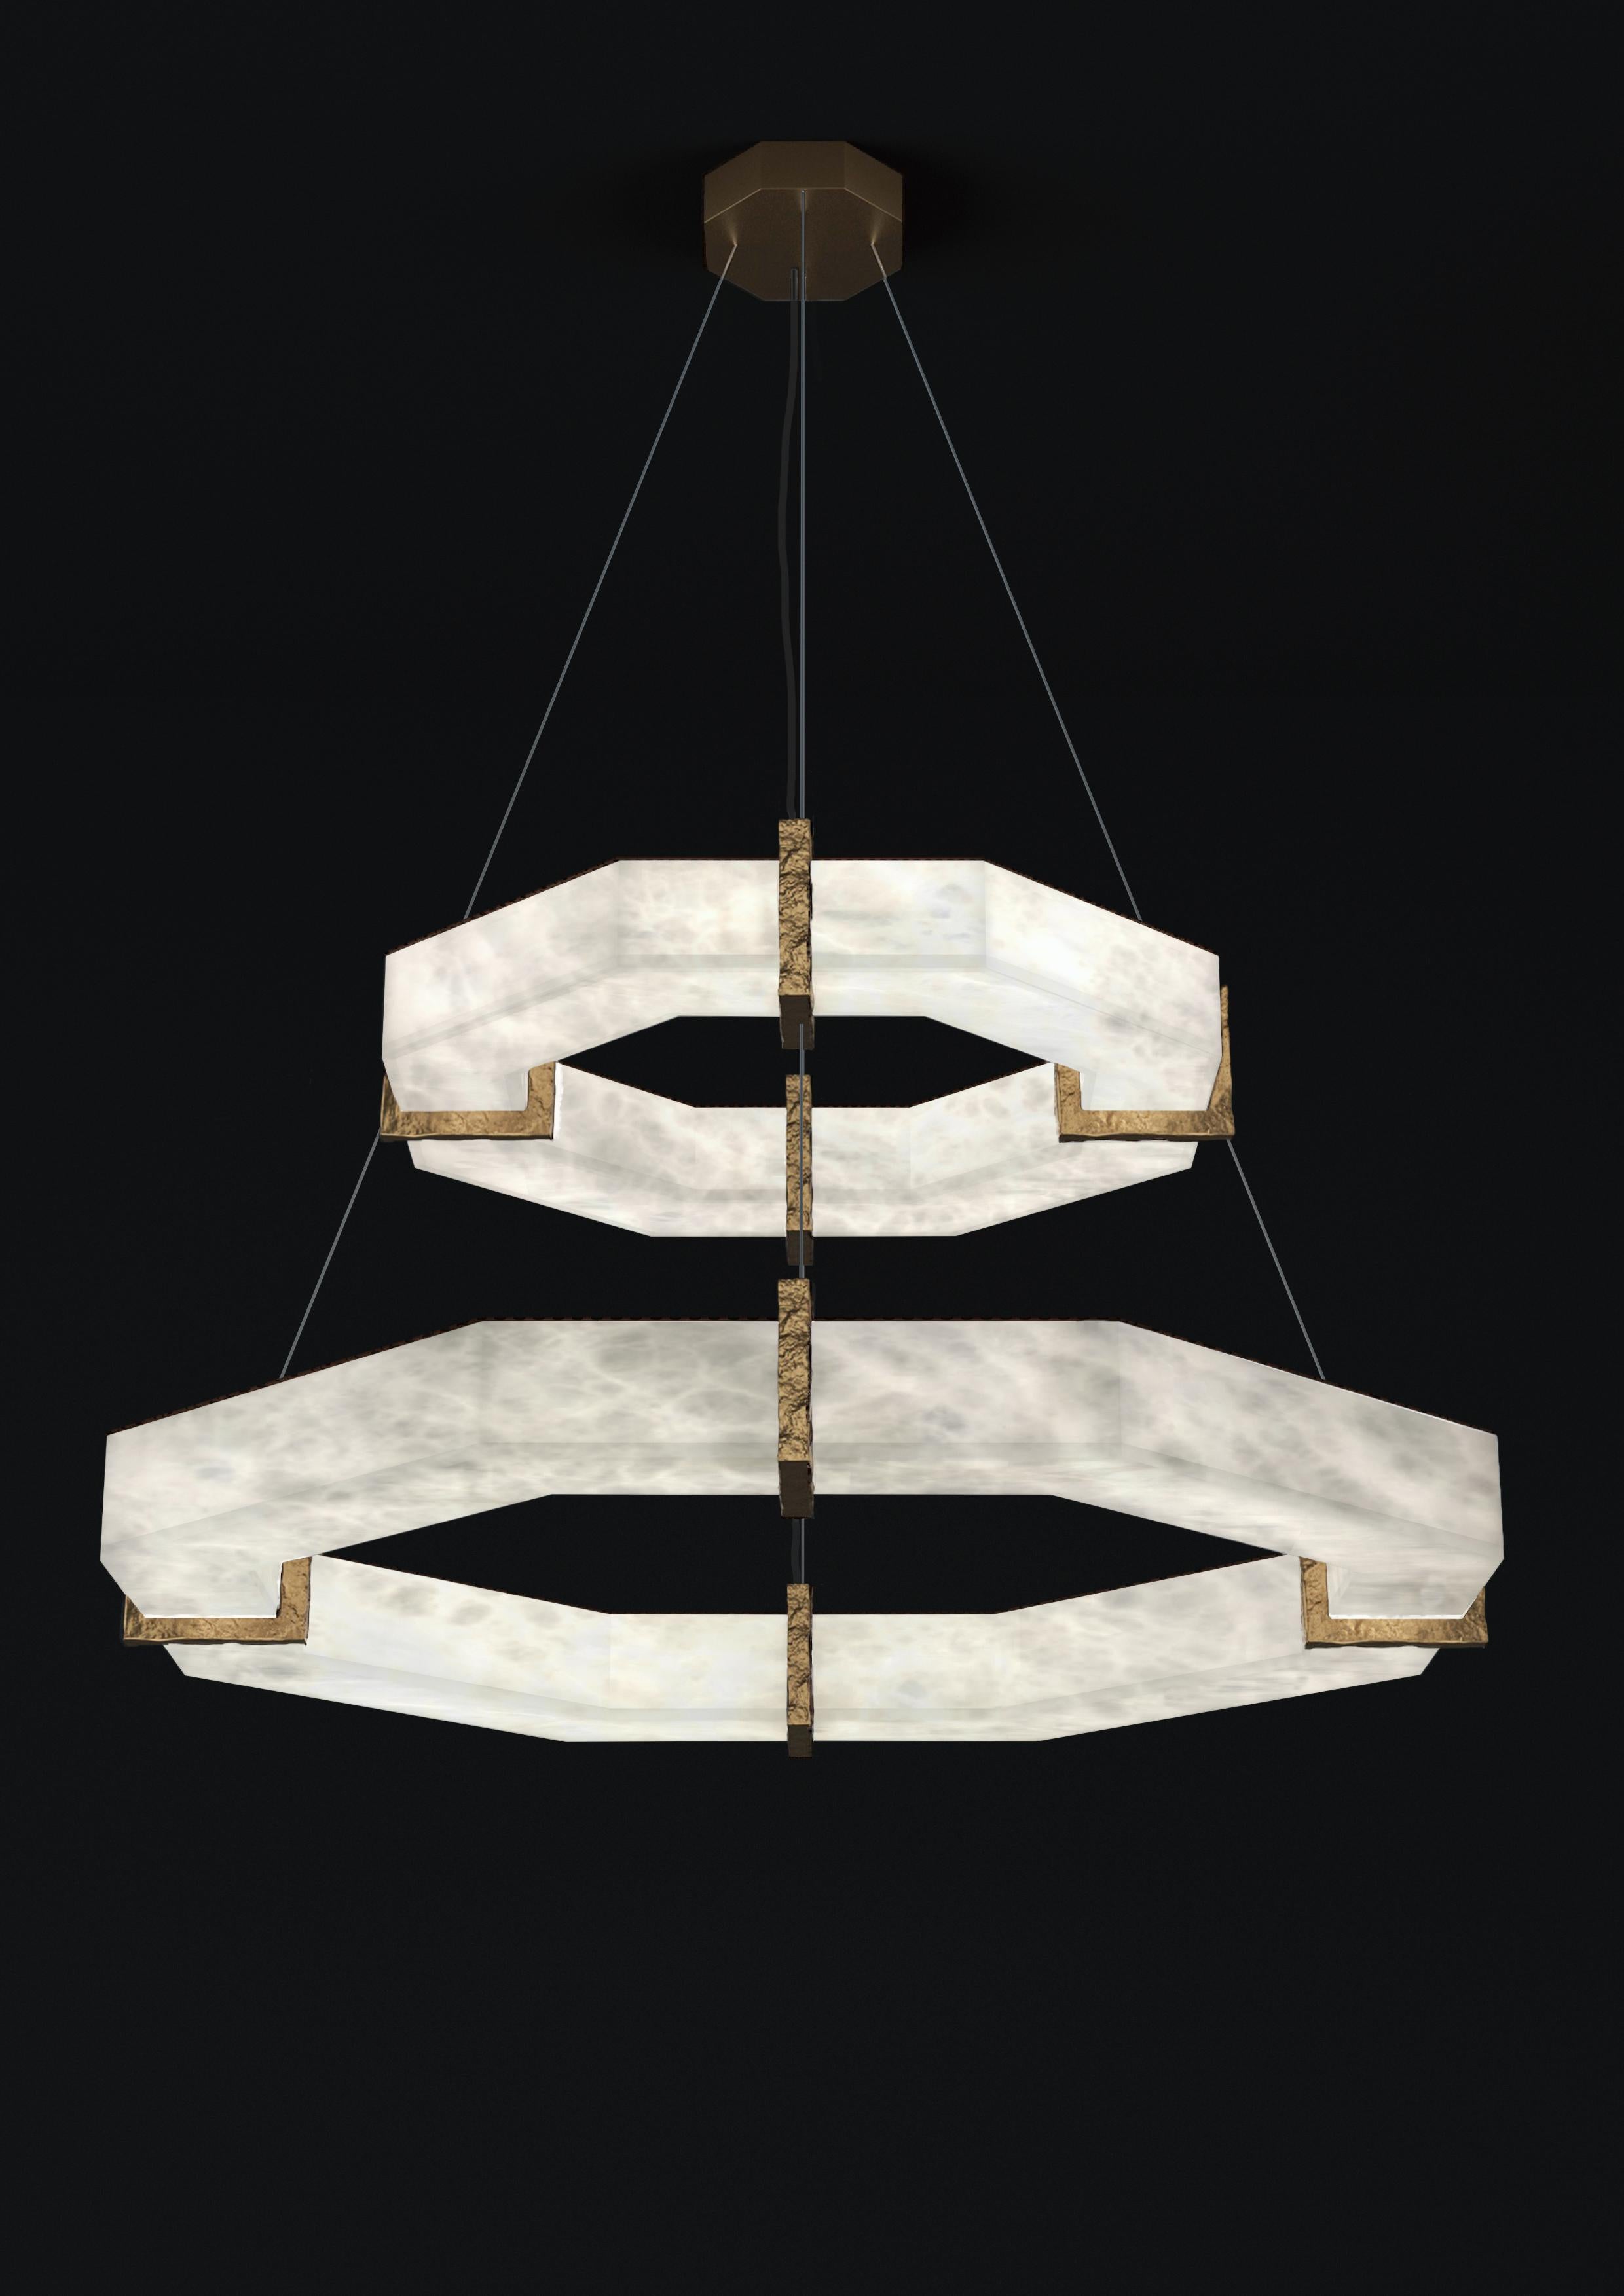 Efesto Bronze Double Pendant Lamp by Alabastro Italiano
Dimensions: D 80.5 x W 80.5 x H 36.5 cm.
Materials: White alabaster and bronze.

Available in different finishes: Shiny Silver, Bronze, Brushed Brass, Ruggine of Florence, Brushed Burnished,